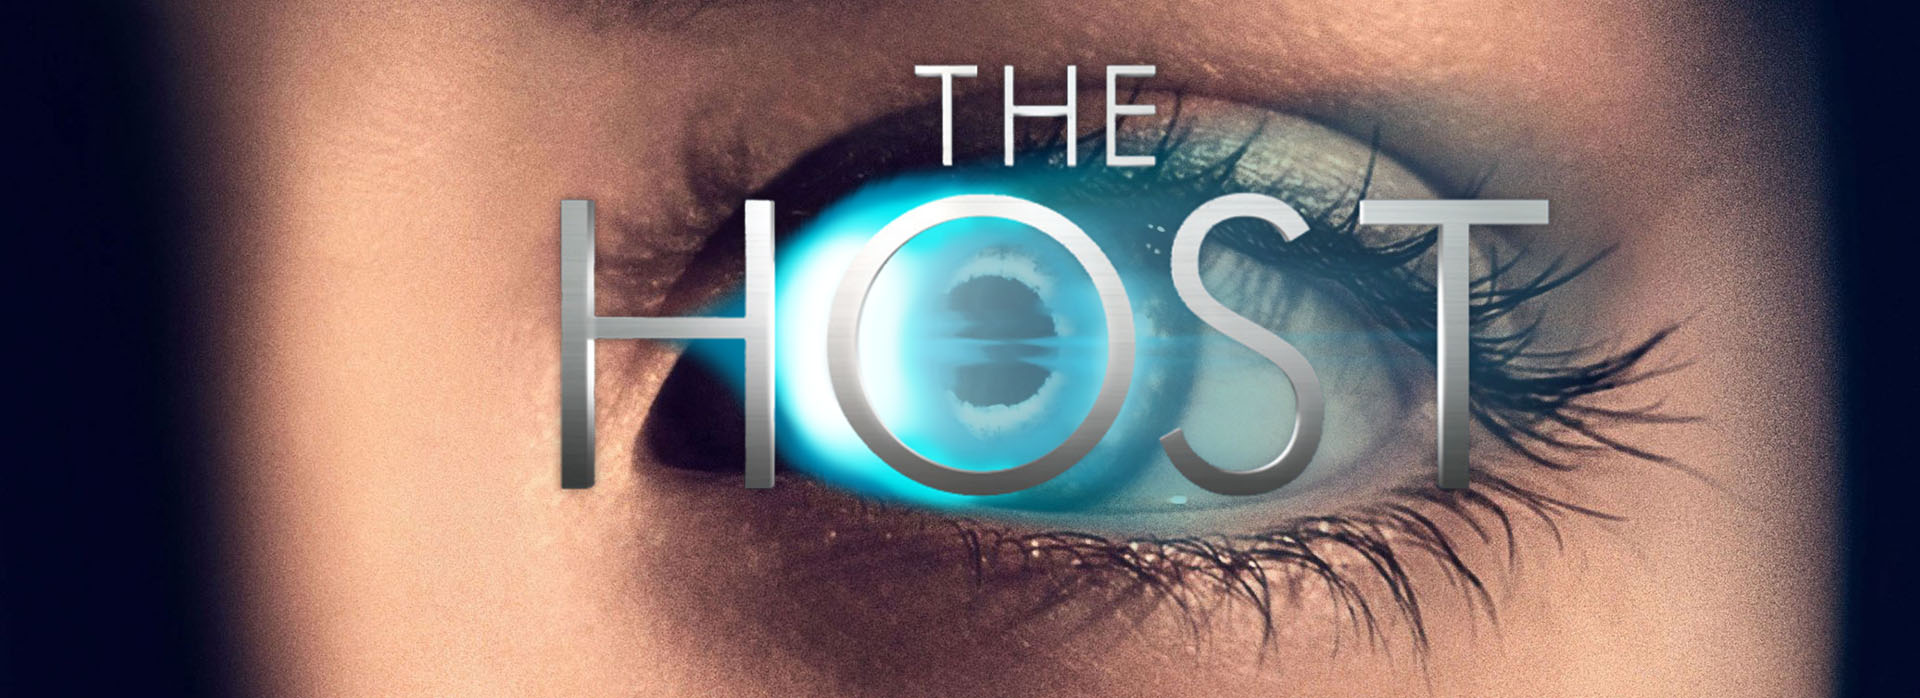 The Host